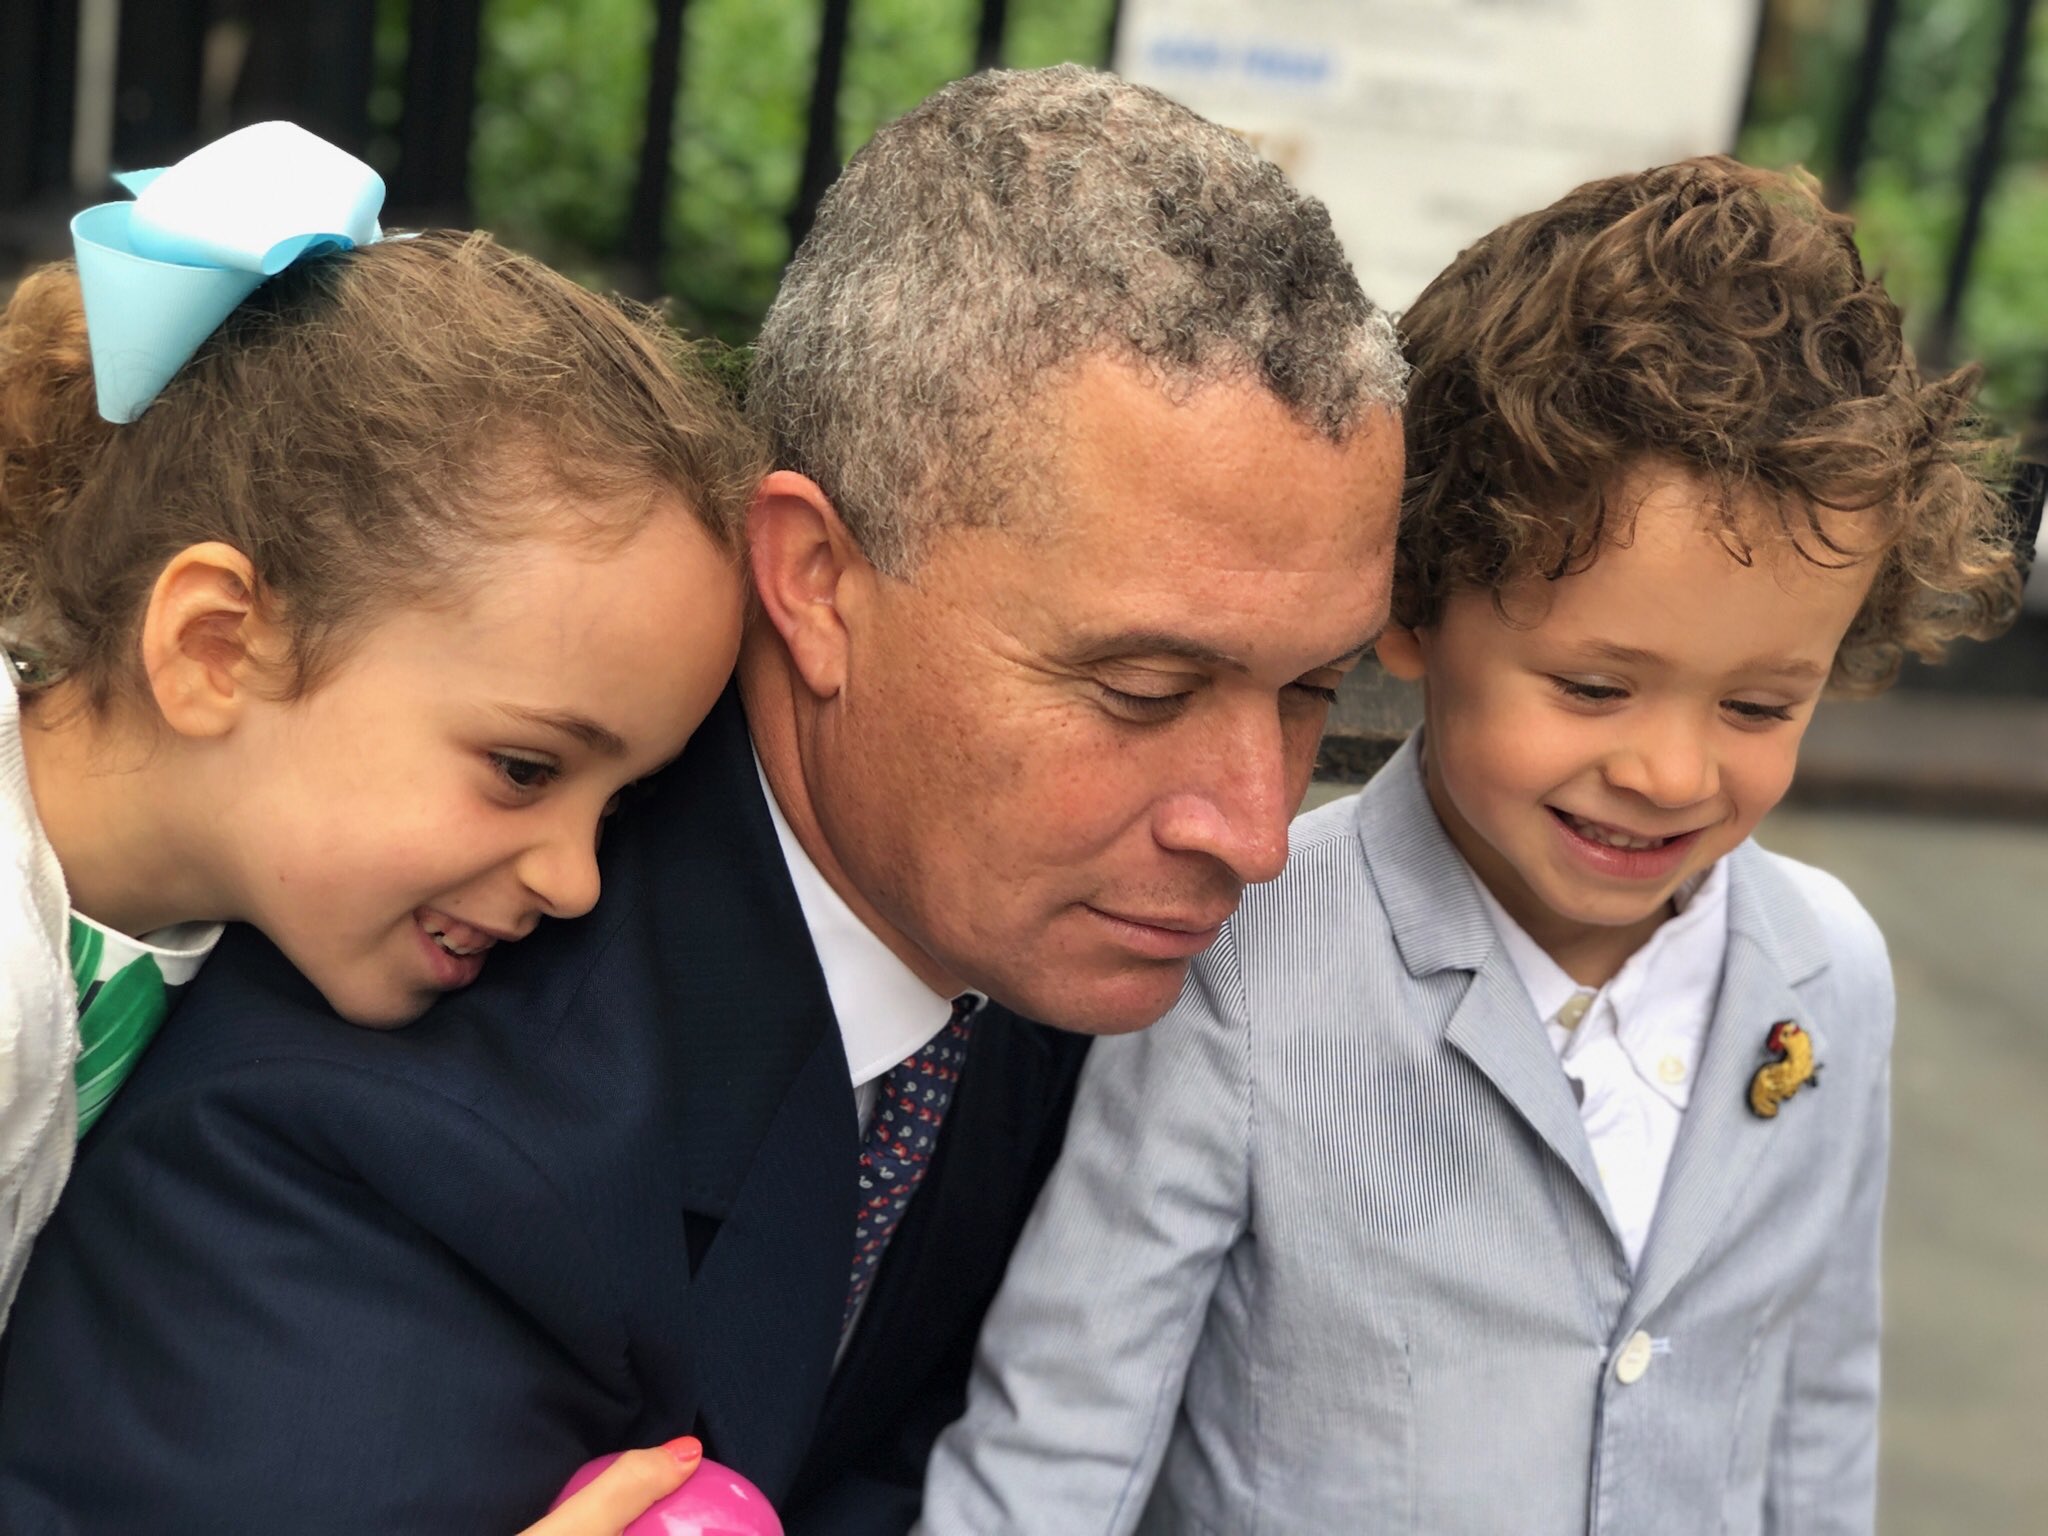 Who Is Harold Ford Jr First Wife Emily Threlkeld? Everything We Know